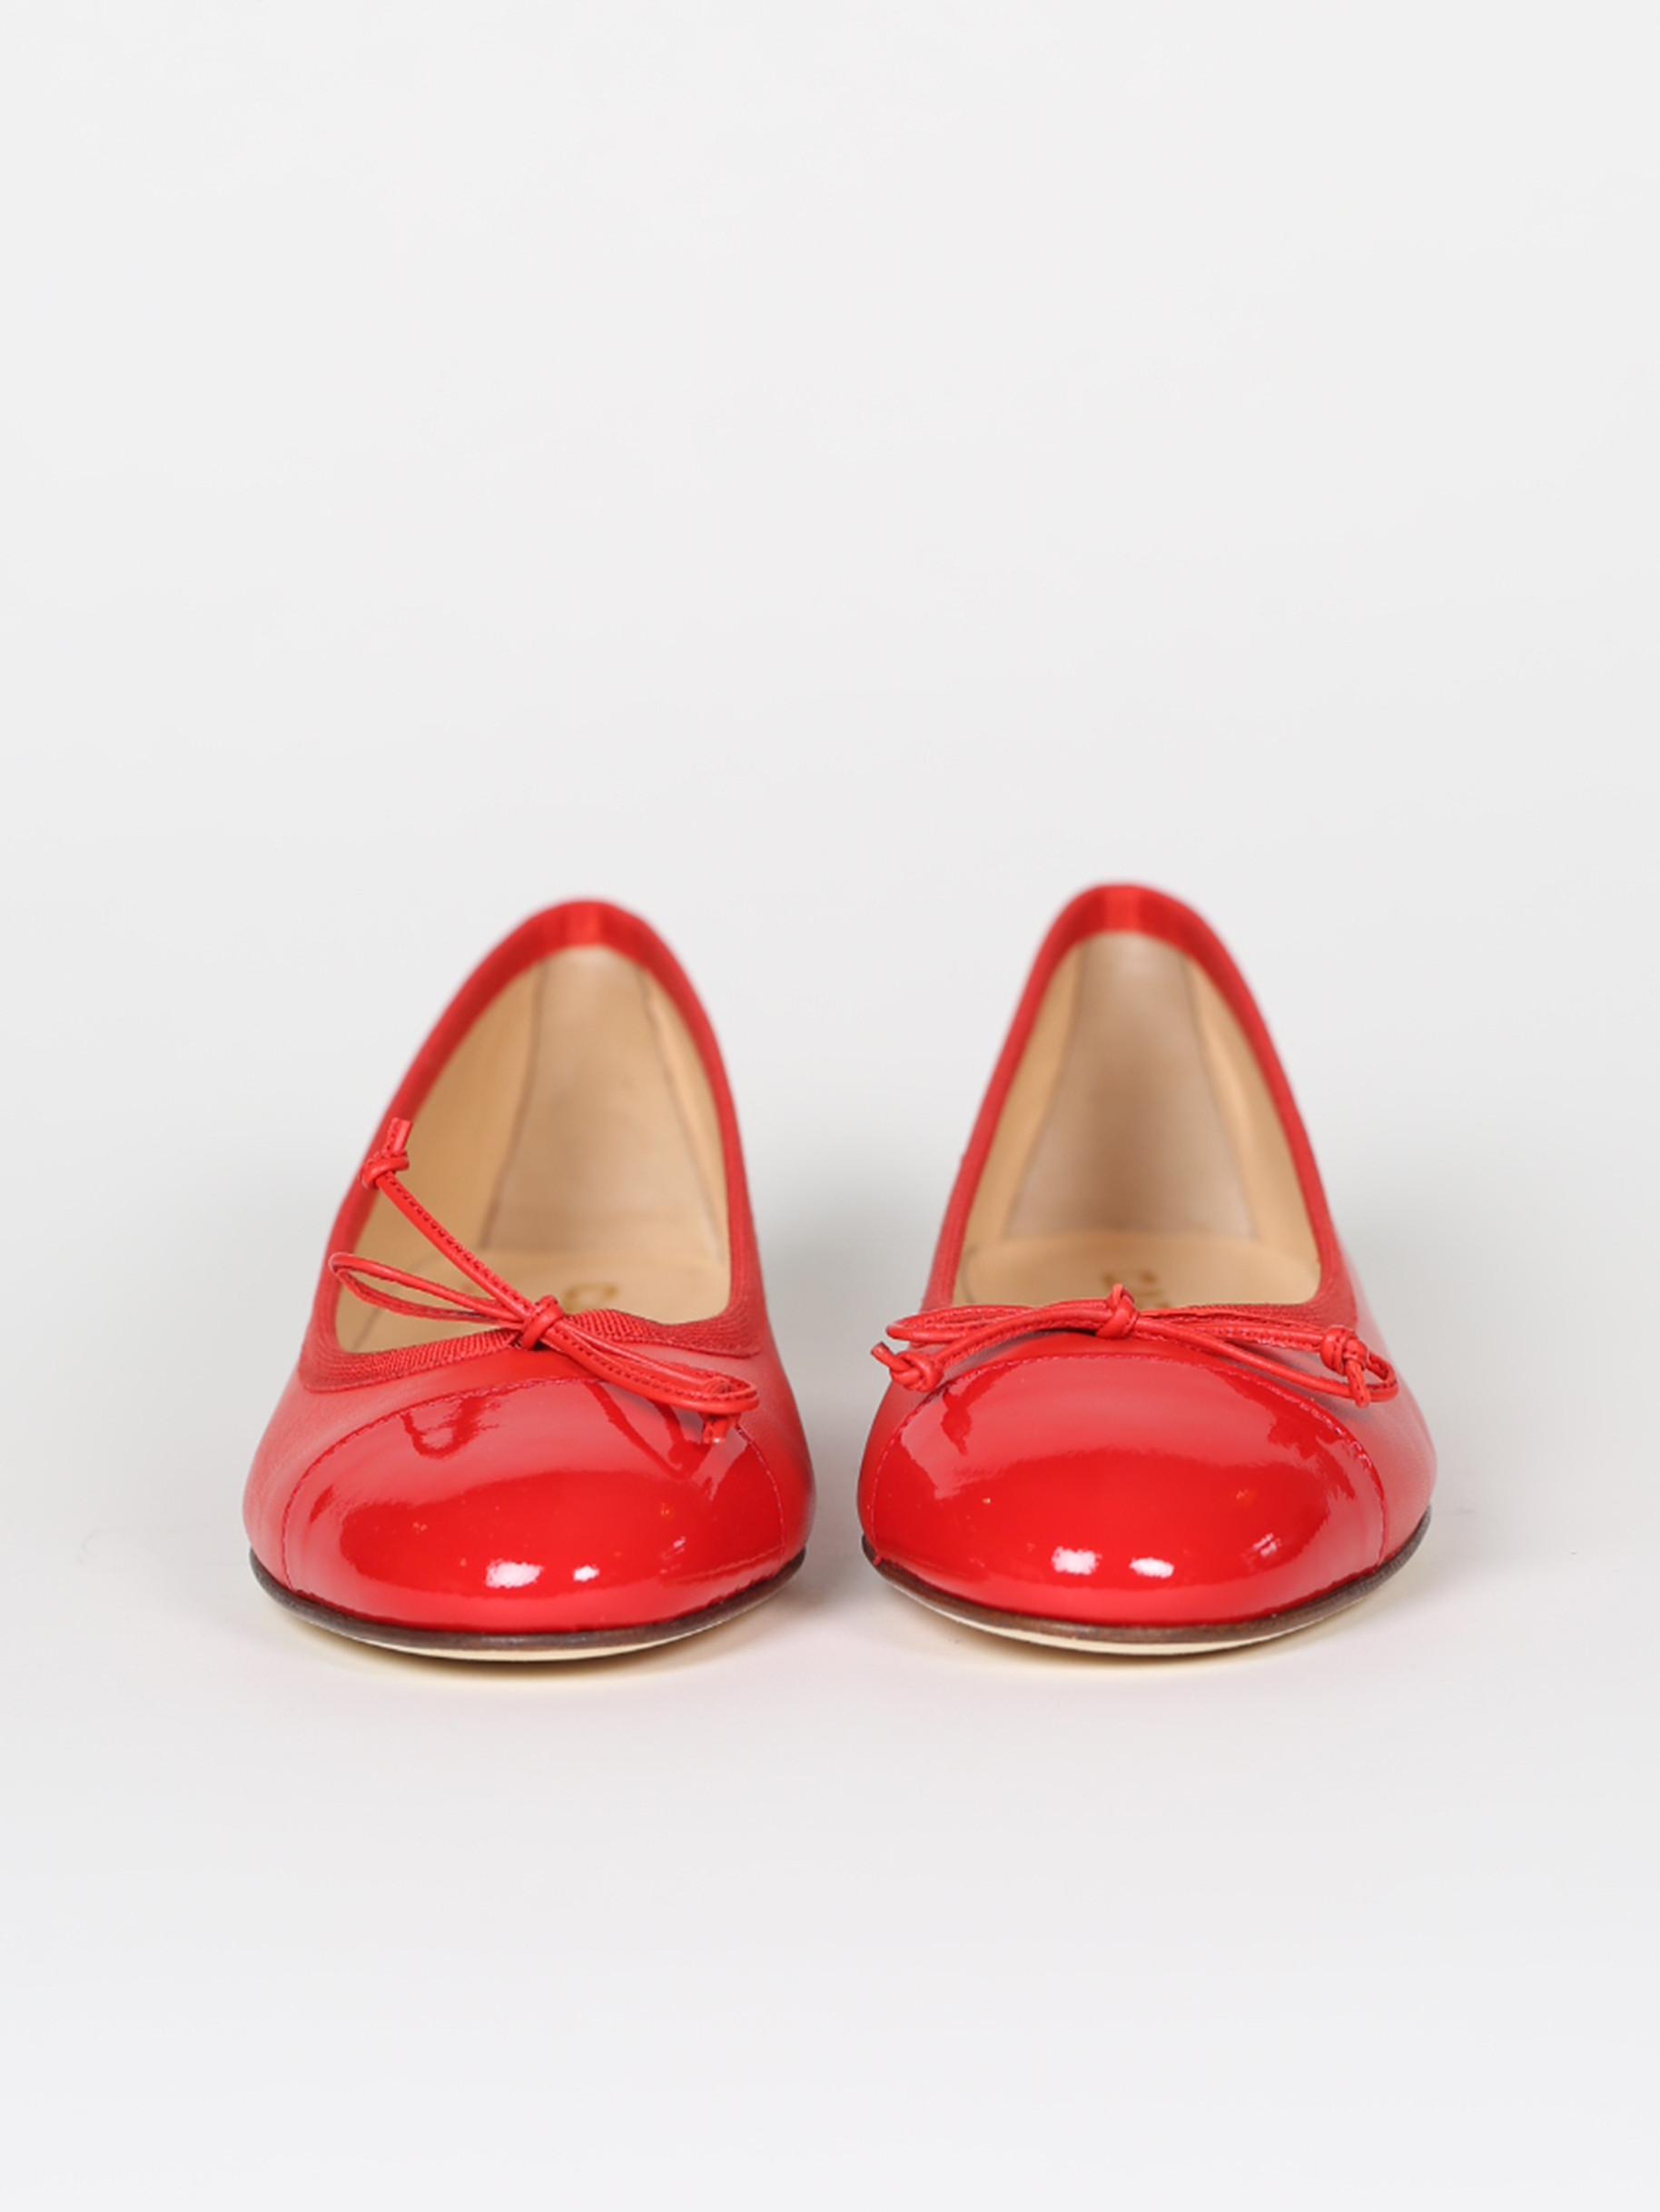 Red leather and patent ballet flats